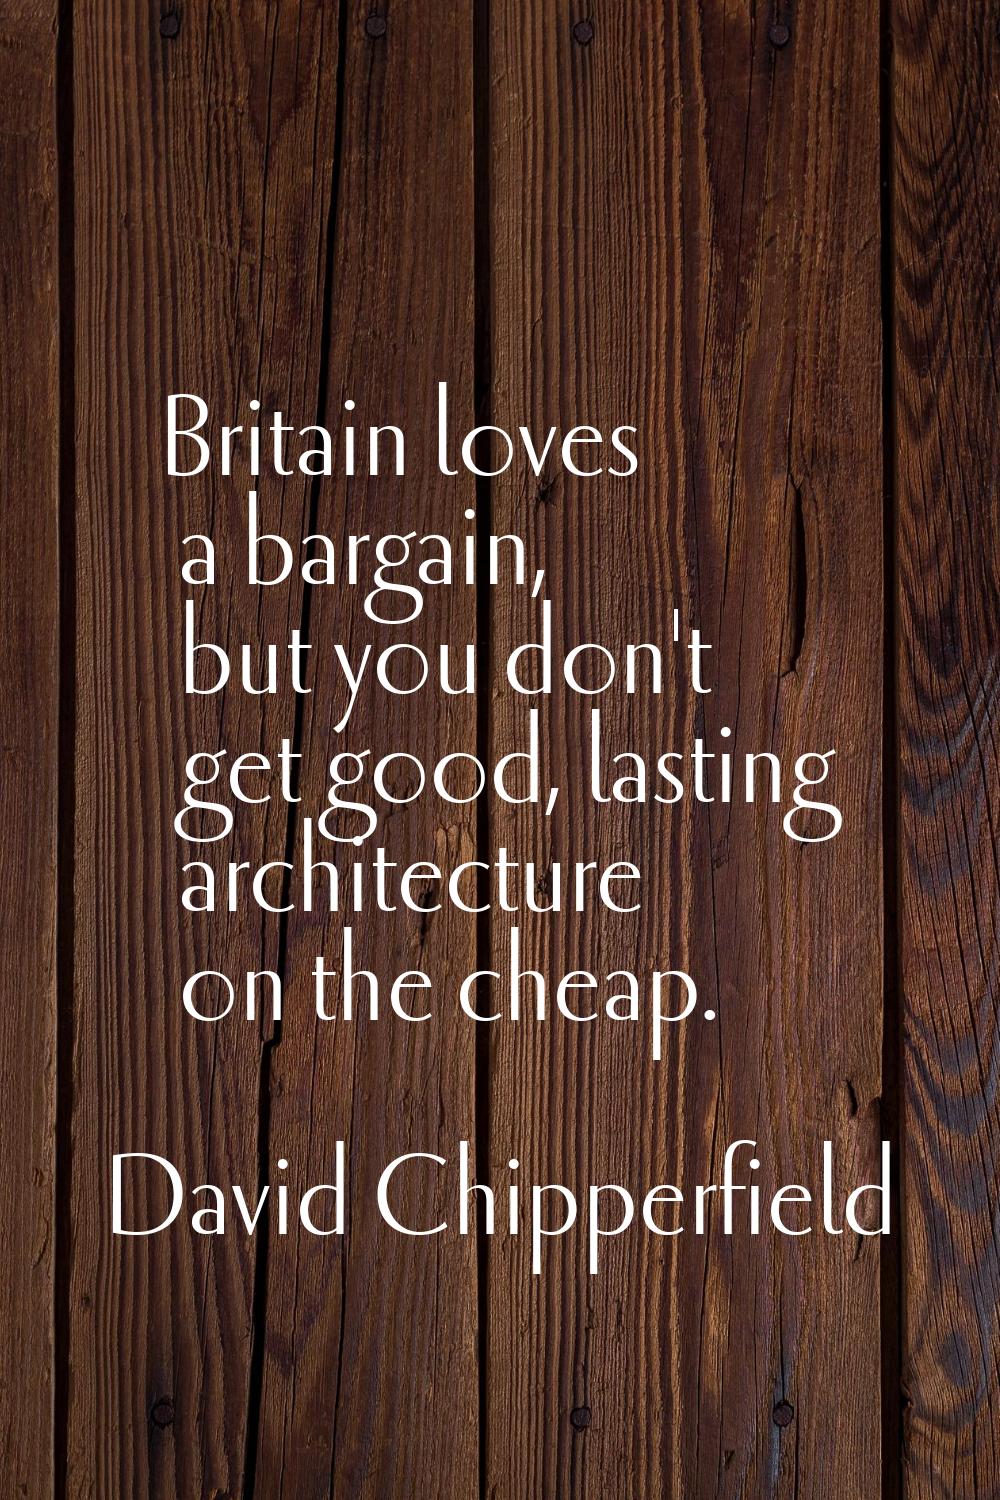 Britain loves a bargain, but you don't get good, lasting architecture on the cheap.